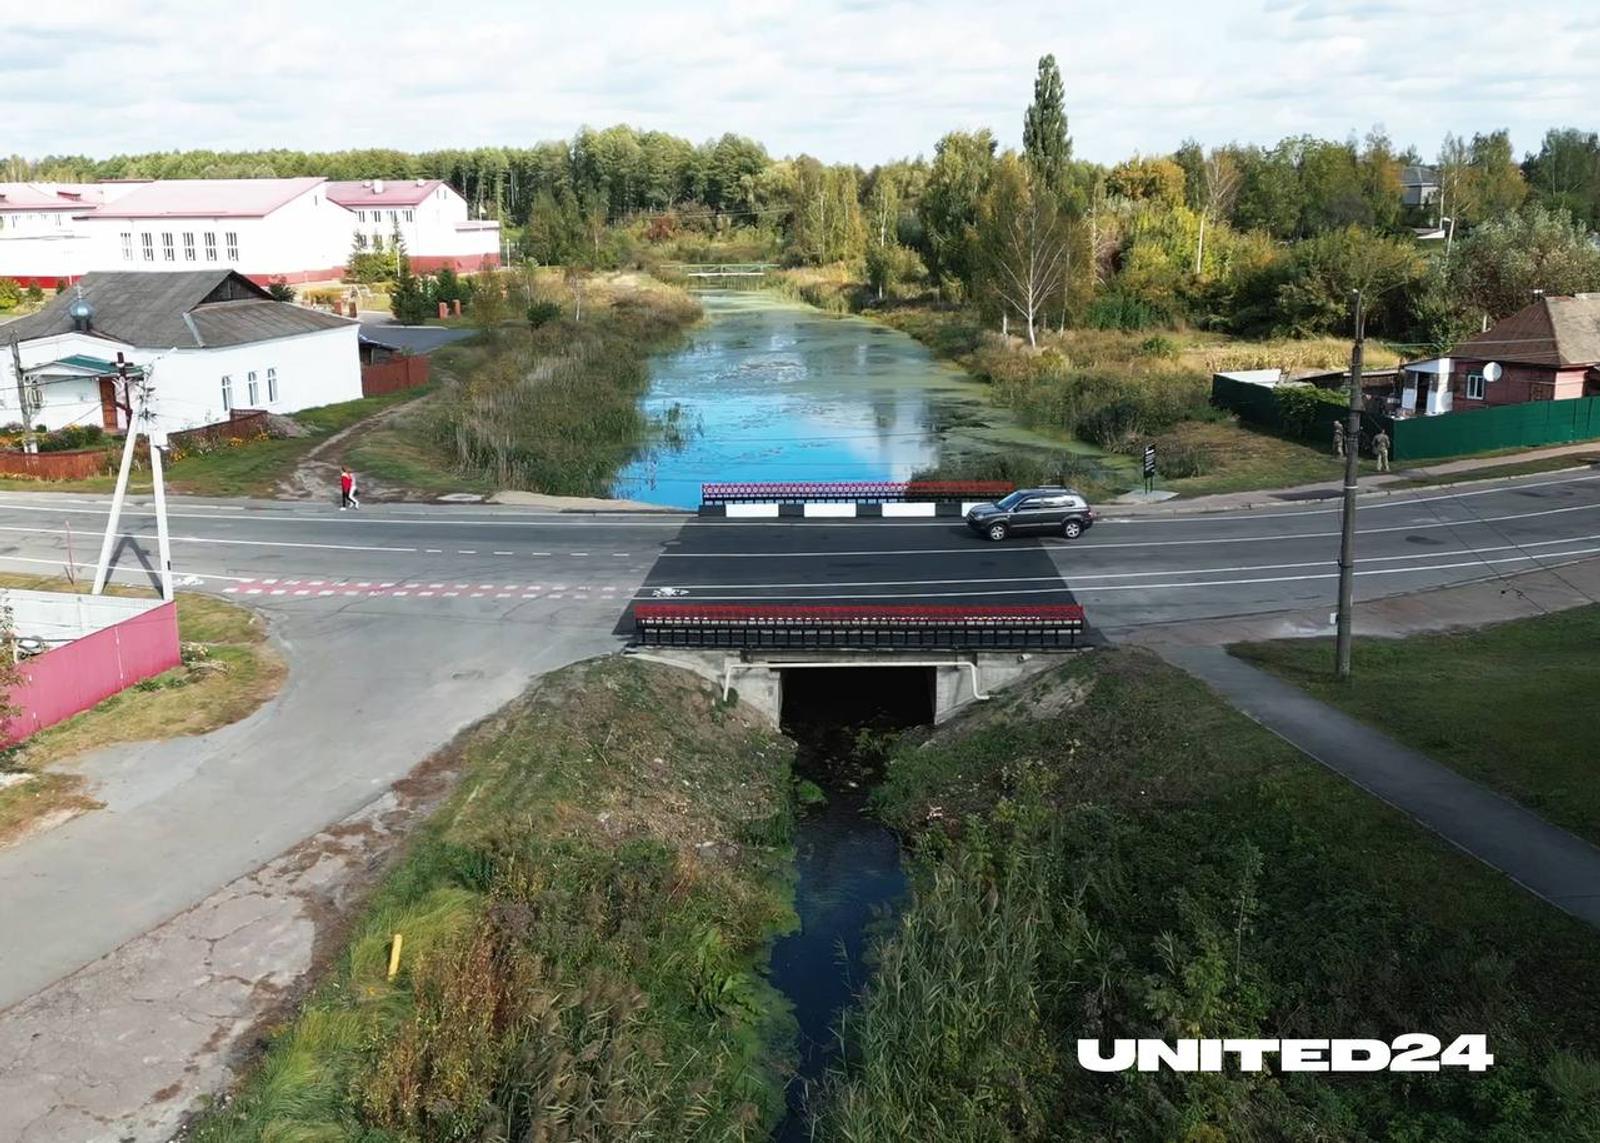 The 18th bridge has been restored thanks to contributions from UNITED24 donors and our regular partner AWT Bavaria